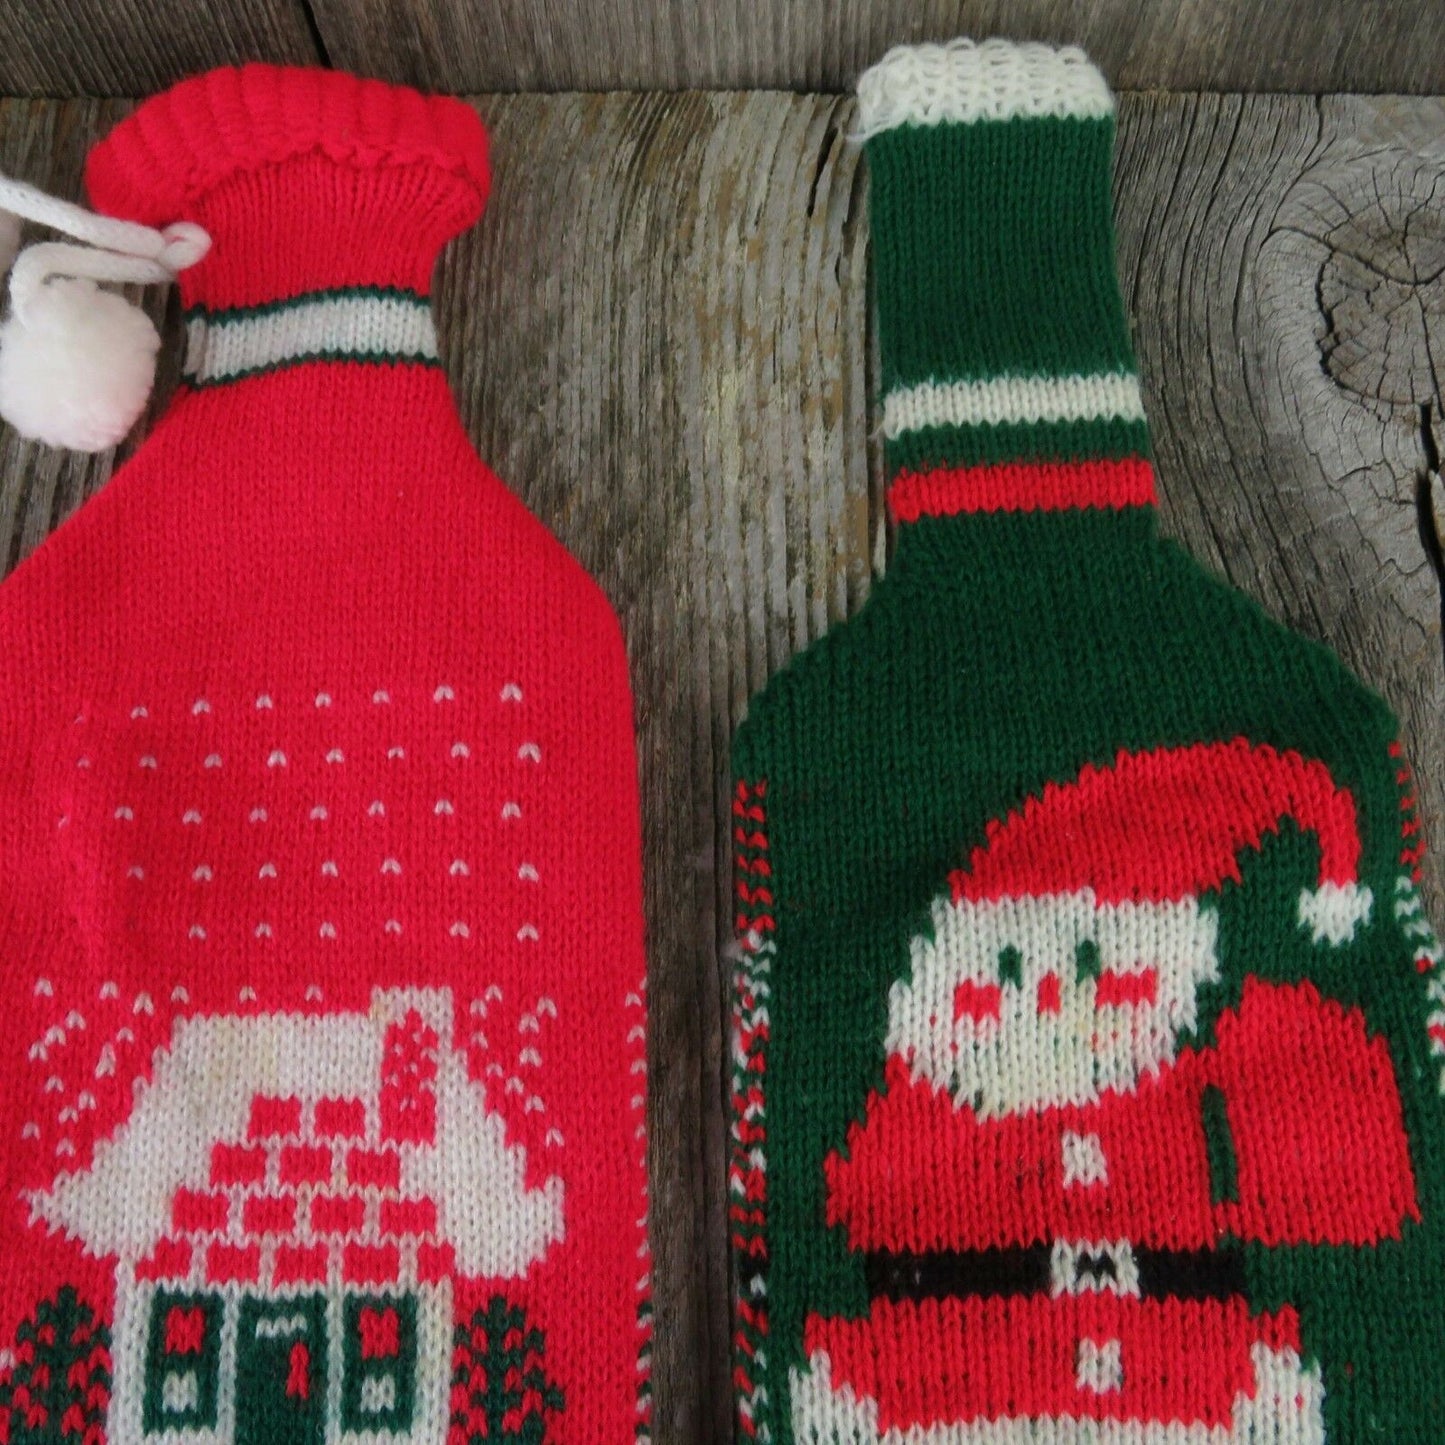 Vintage Christmas Stocking Bottle Covers Tote Red White Green Knitted Gift - At Grandma's Table